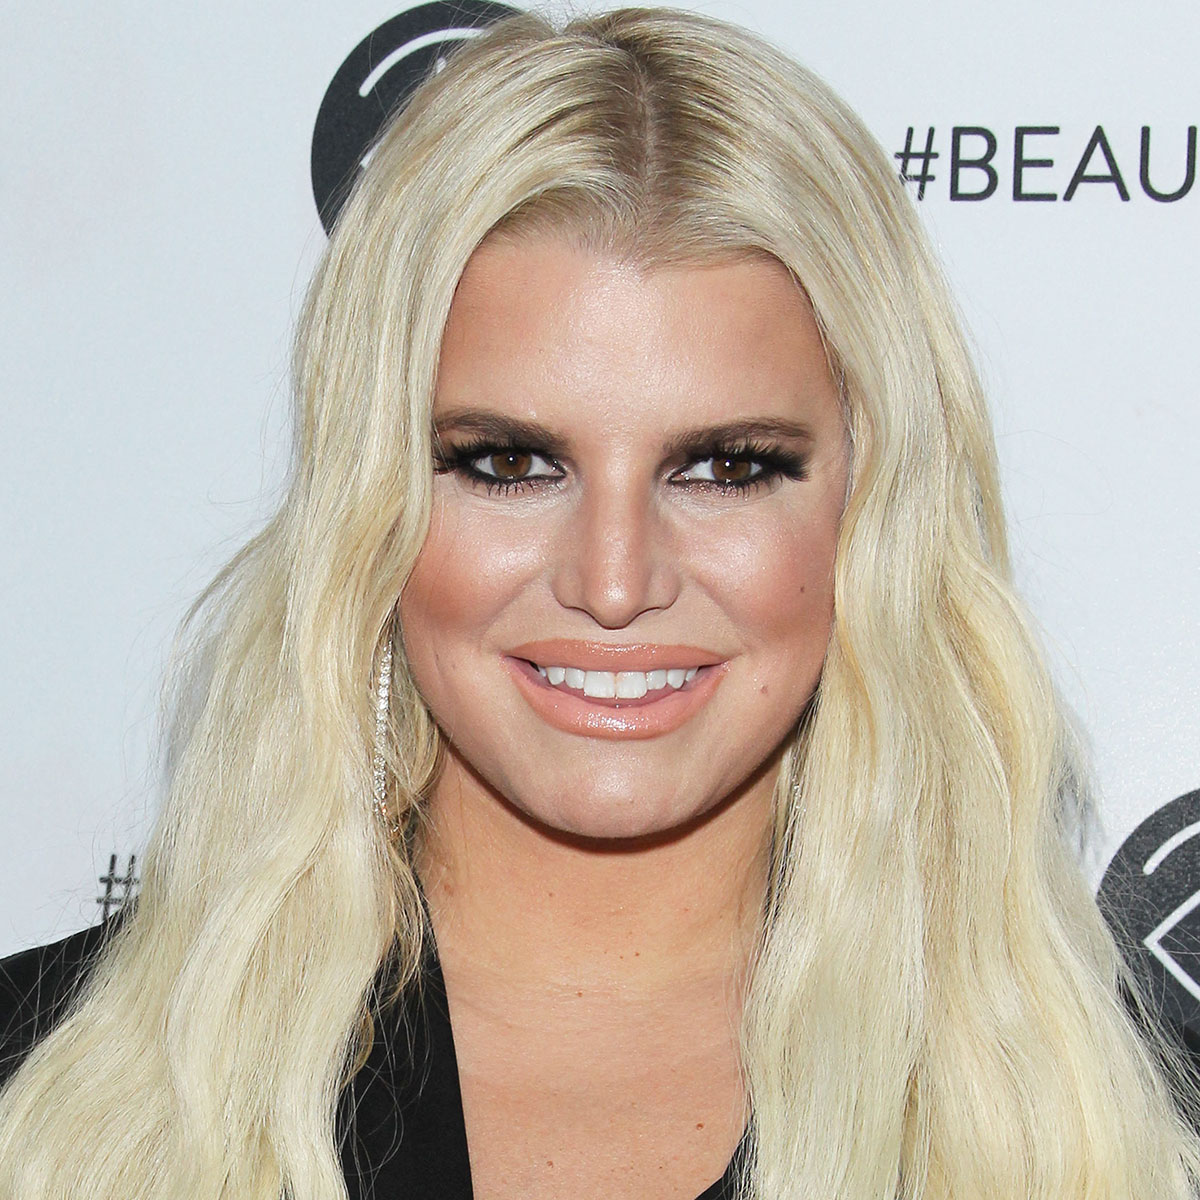 Jessica Simpson Shows Off 100-lb Weight Loss In Leopard Jacket And